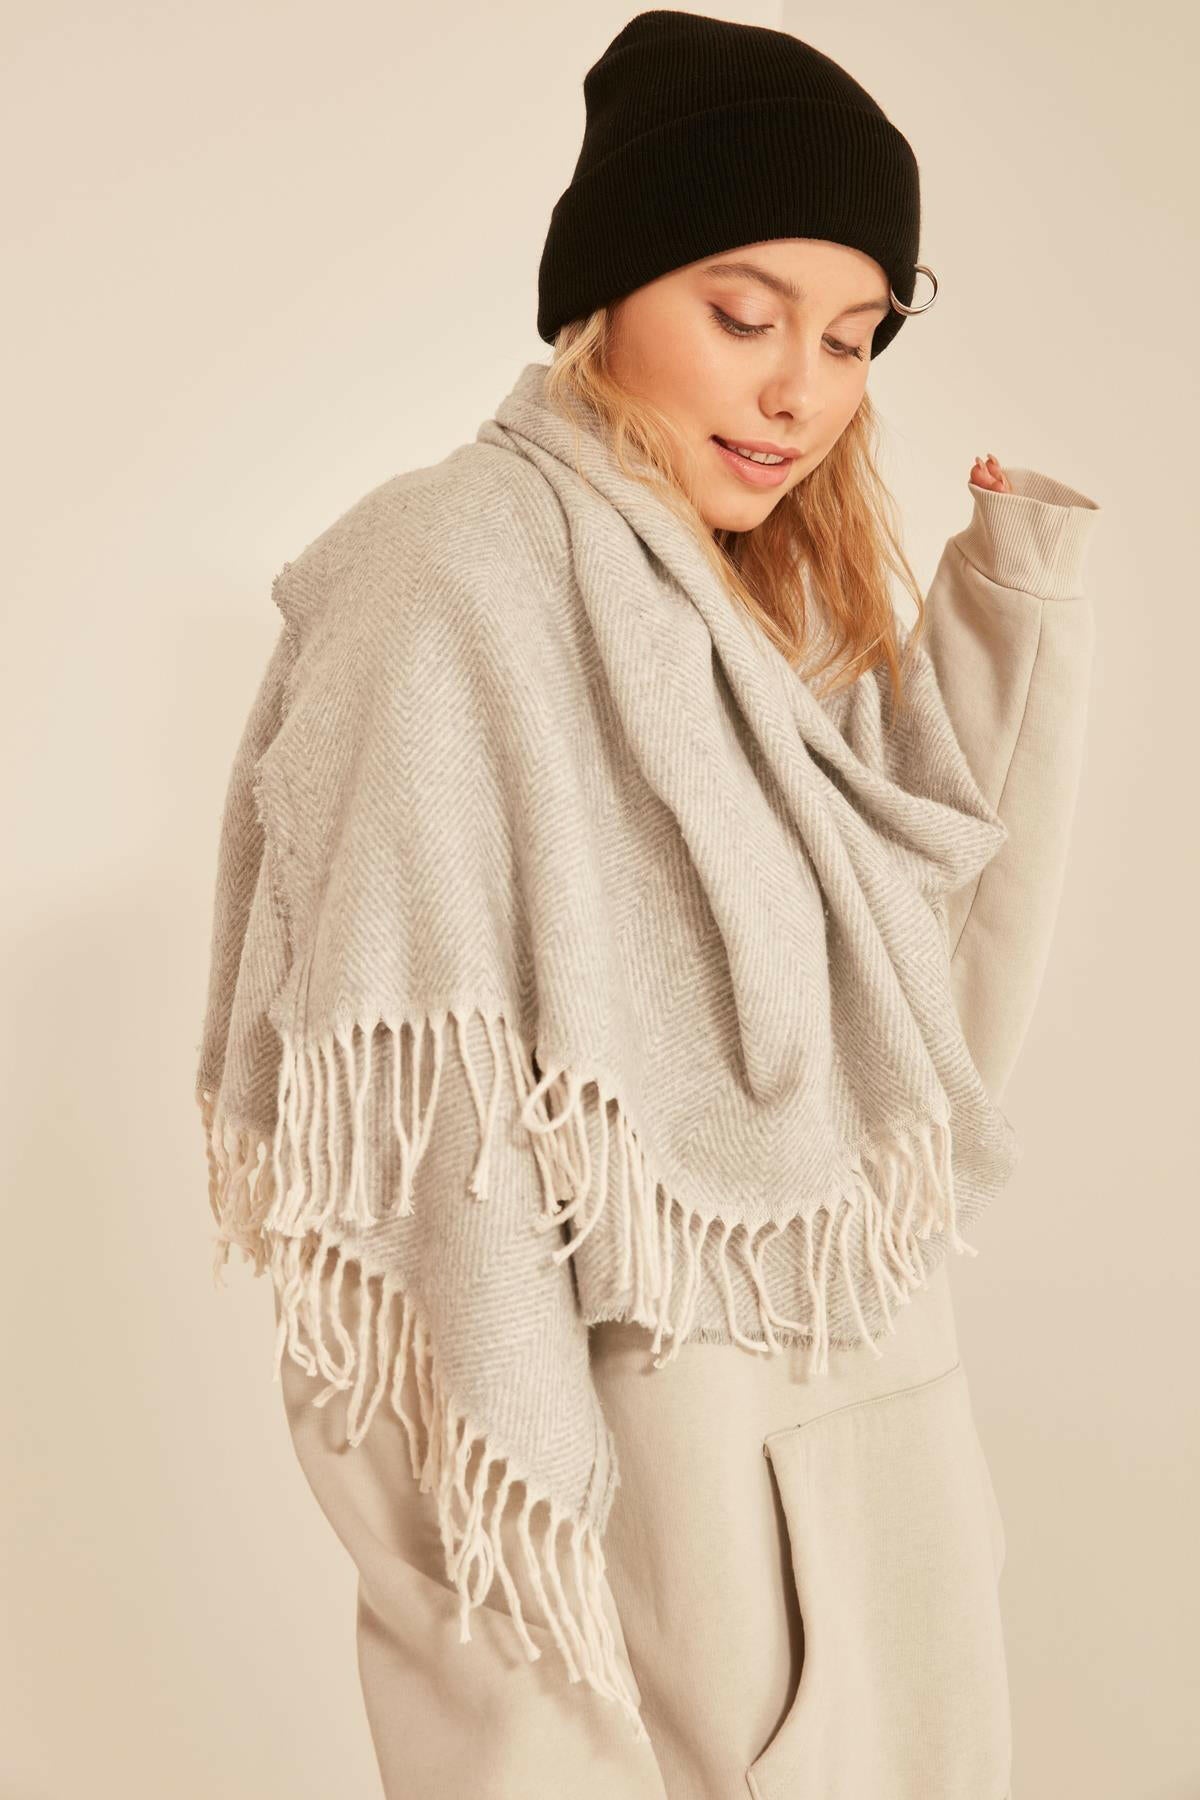 Luxurious Soft Textured Tassels Light Thick Shoulder Scarf Grey Color - Pinkpie